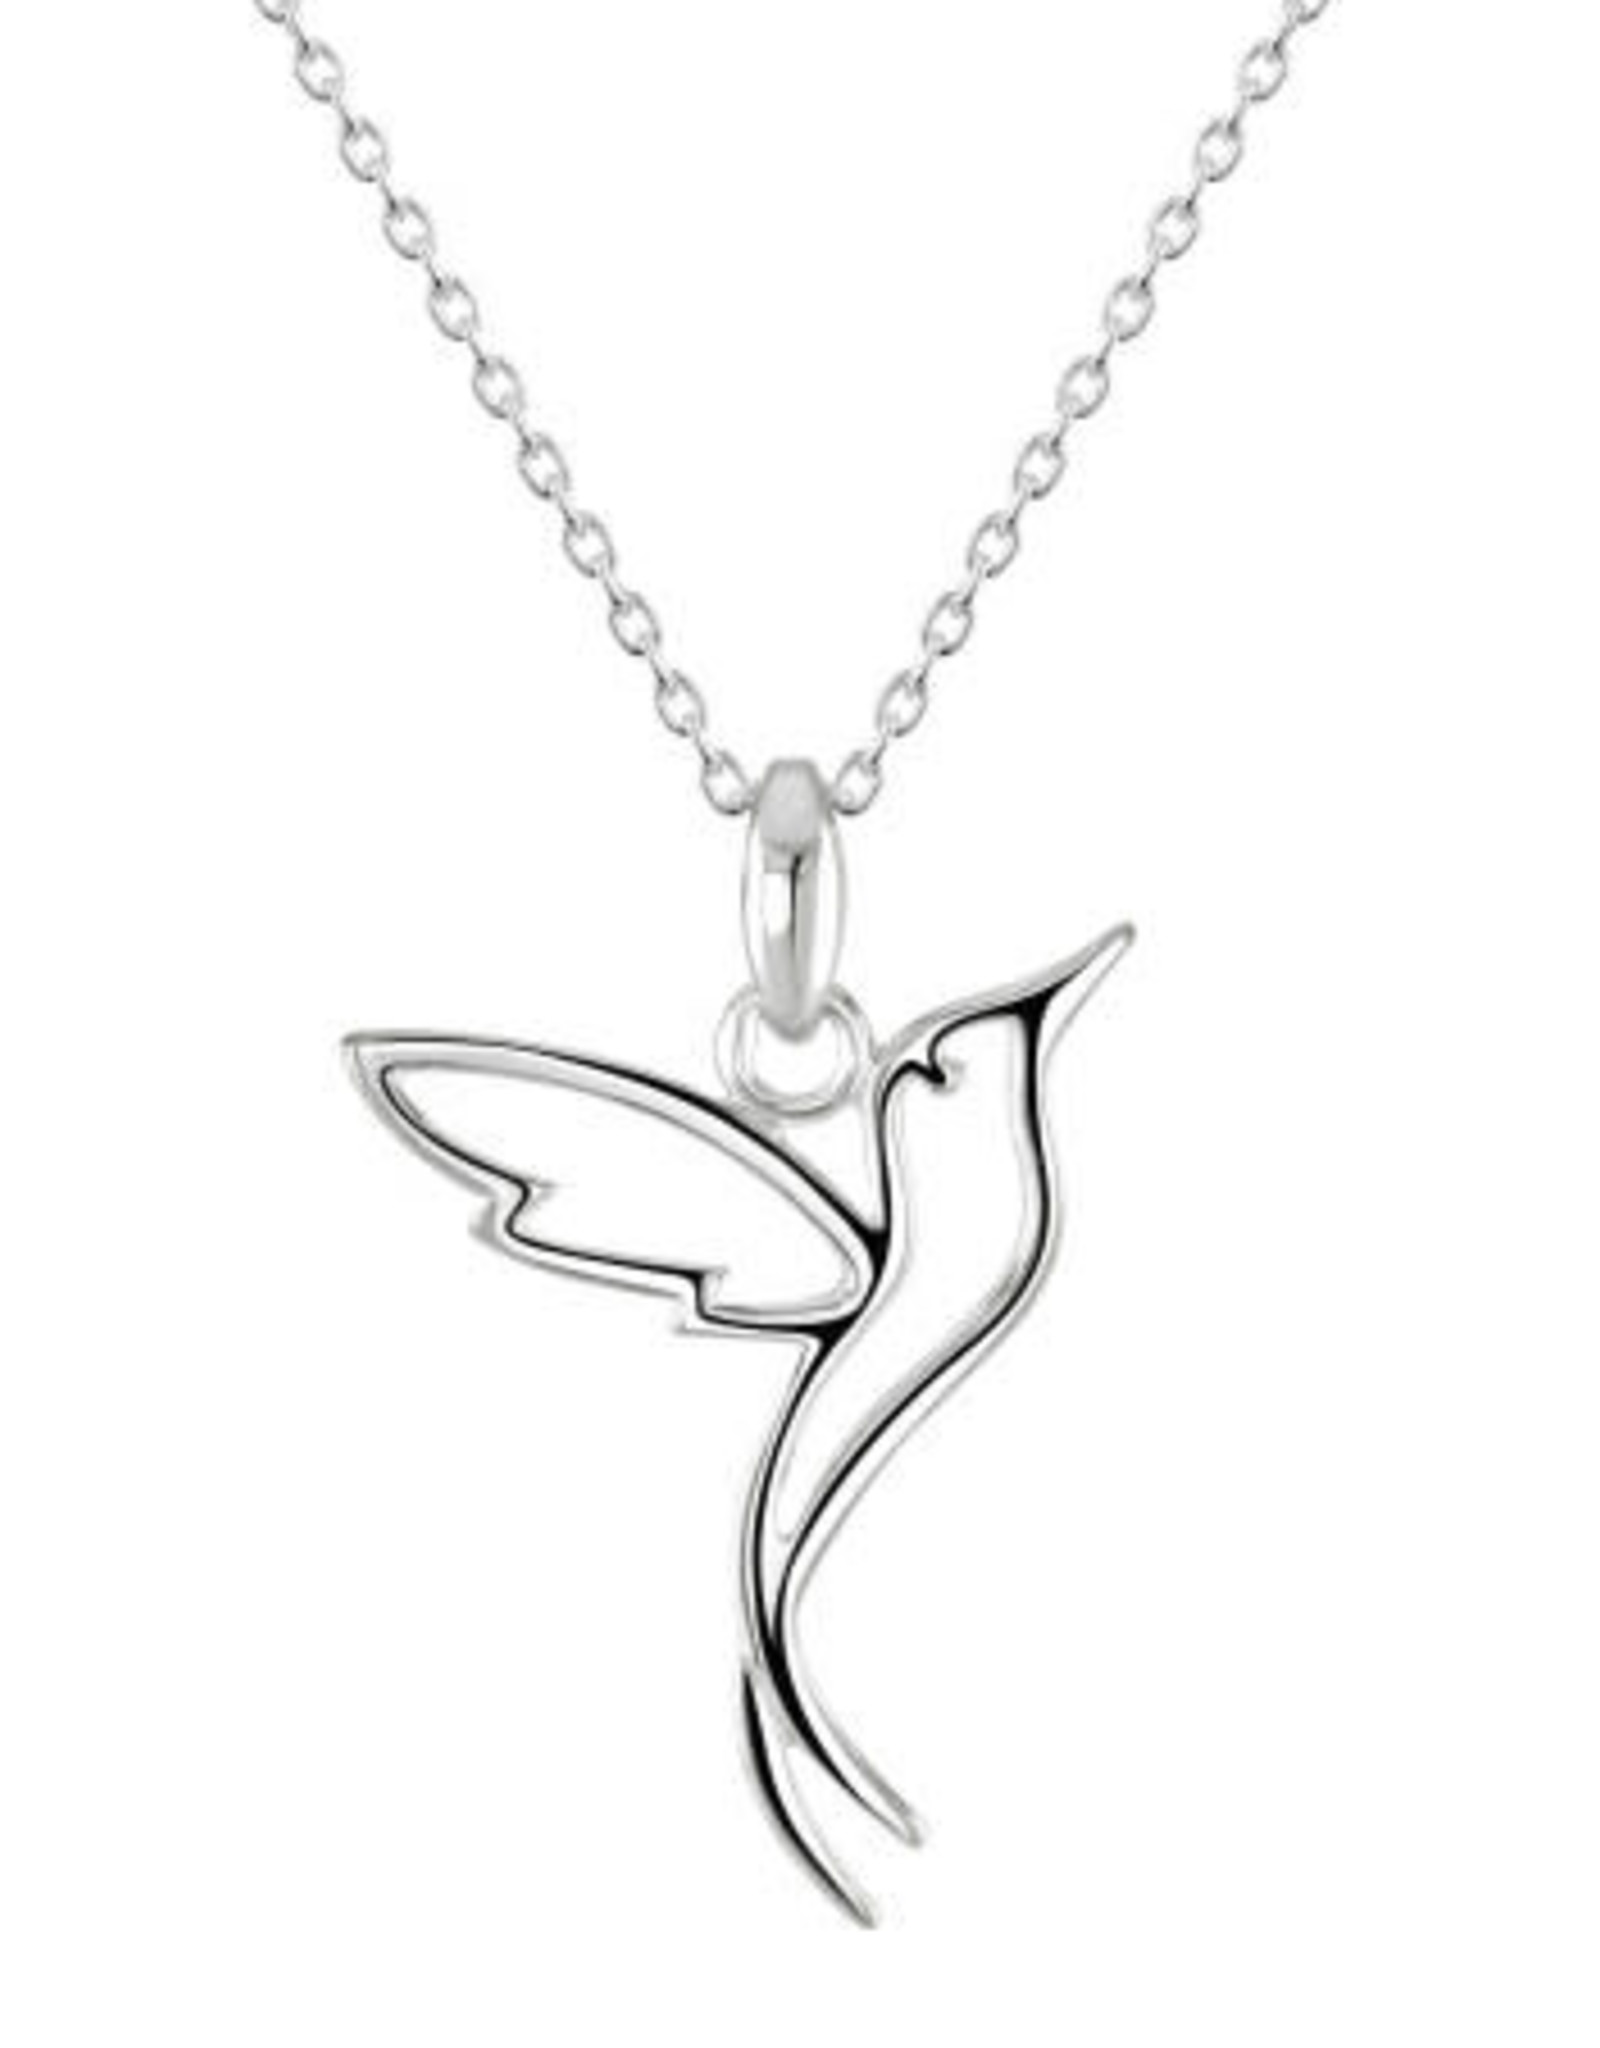 Kit Heath HUMMING BIRD NECKLACE - sterling silver